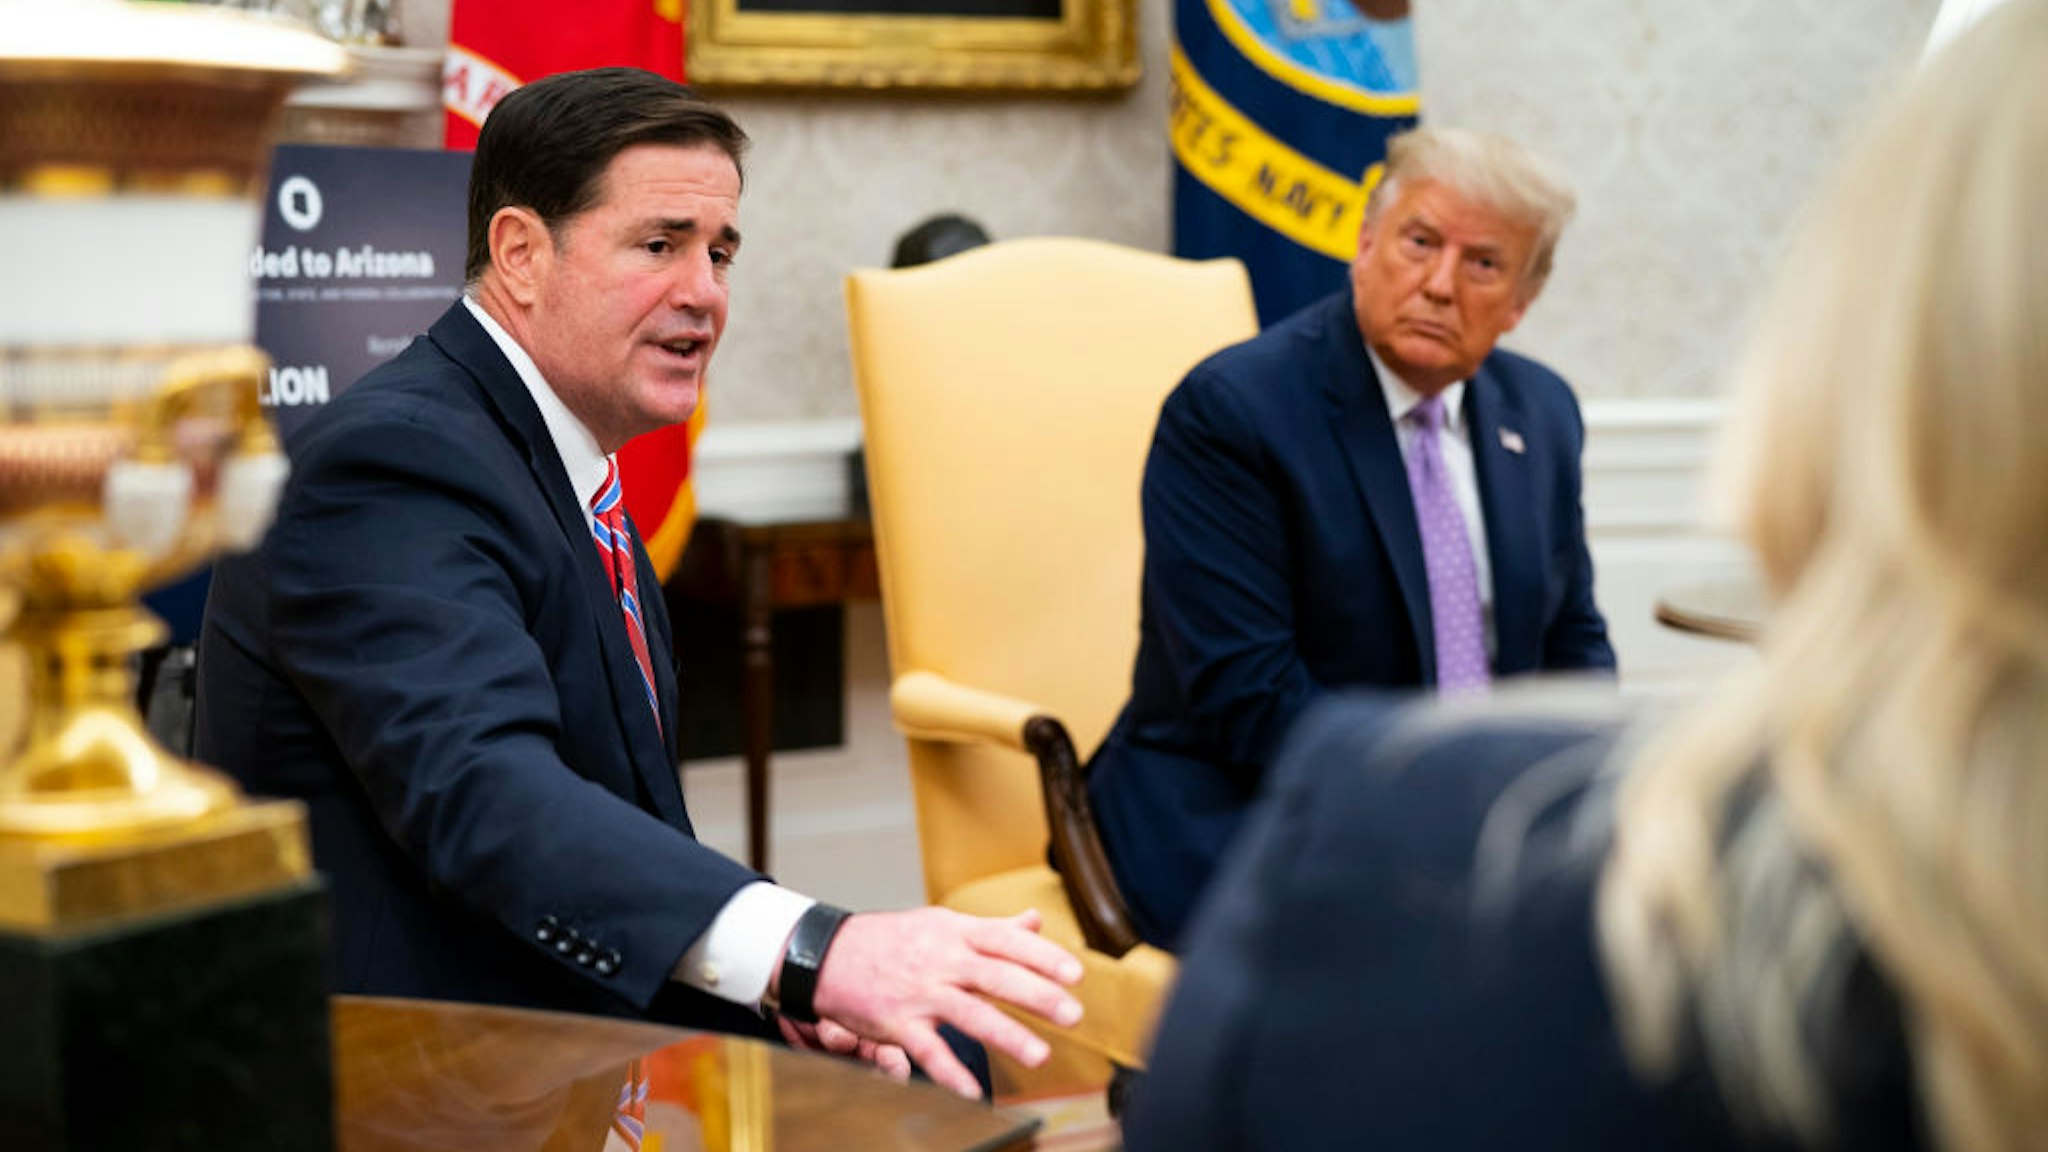 U.S. President Donald Trump meets with Arizona Governor Doug Ducey (L) in the Oval Office of the White House on August 5, 2020 in Washington, DC.